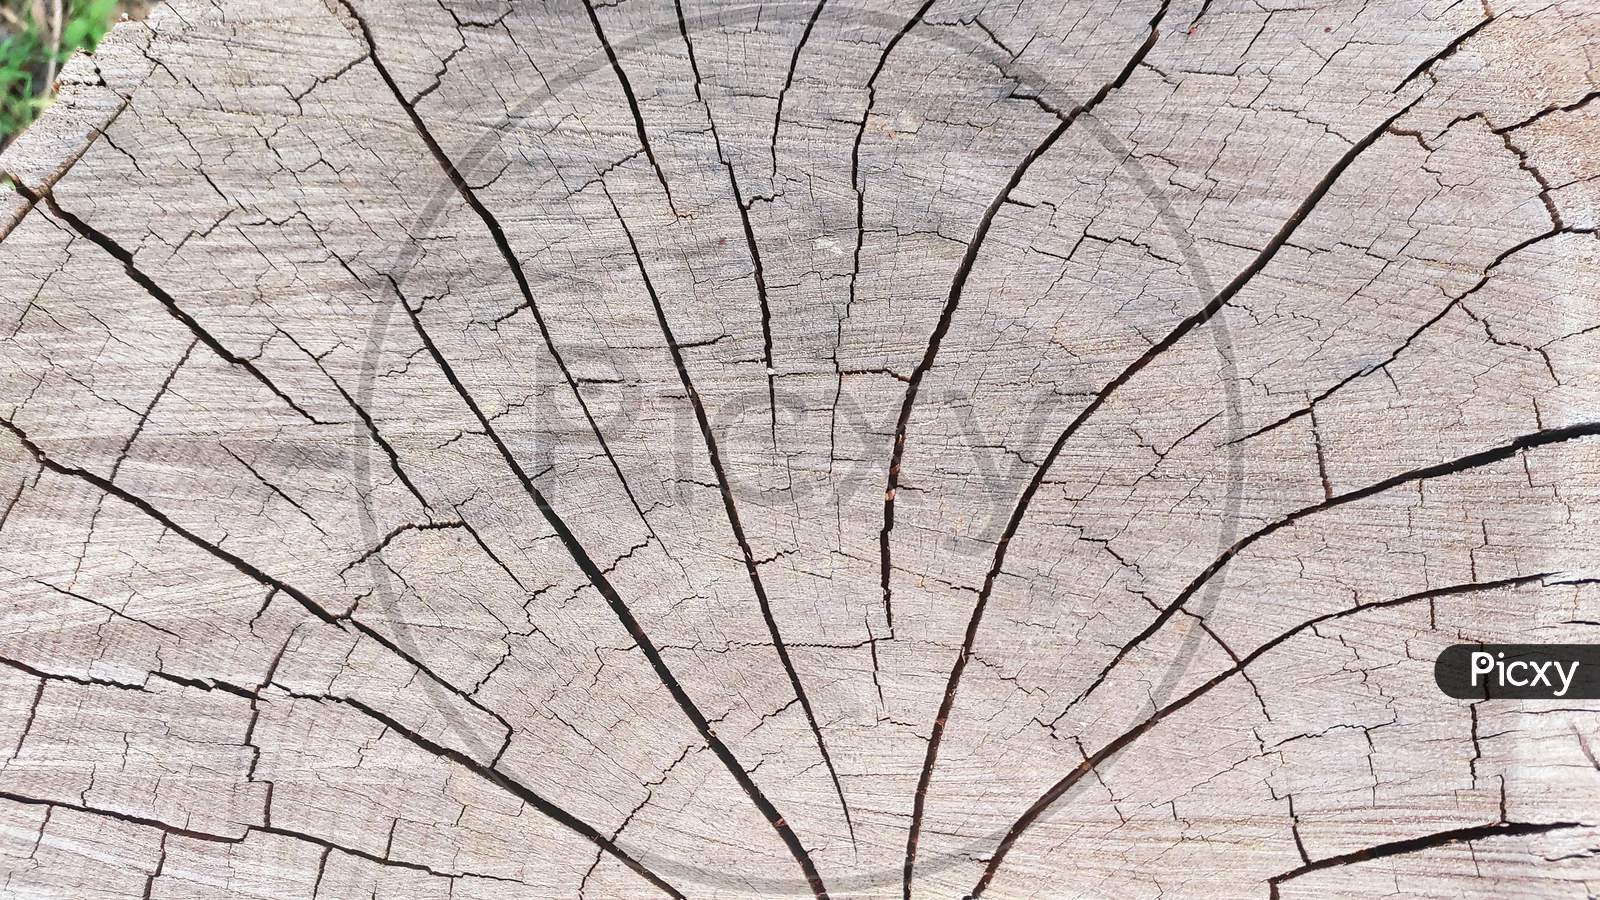 Crack marks on wooden surface